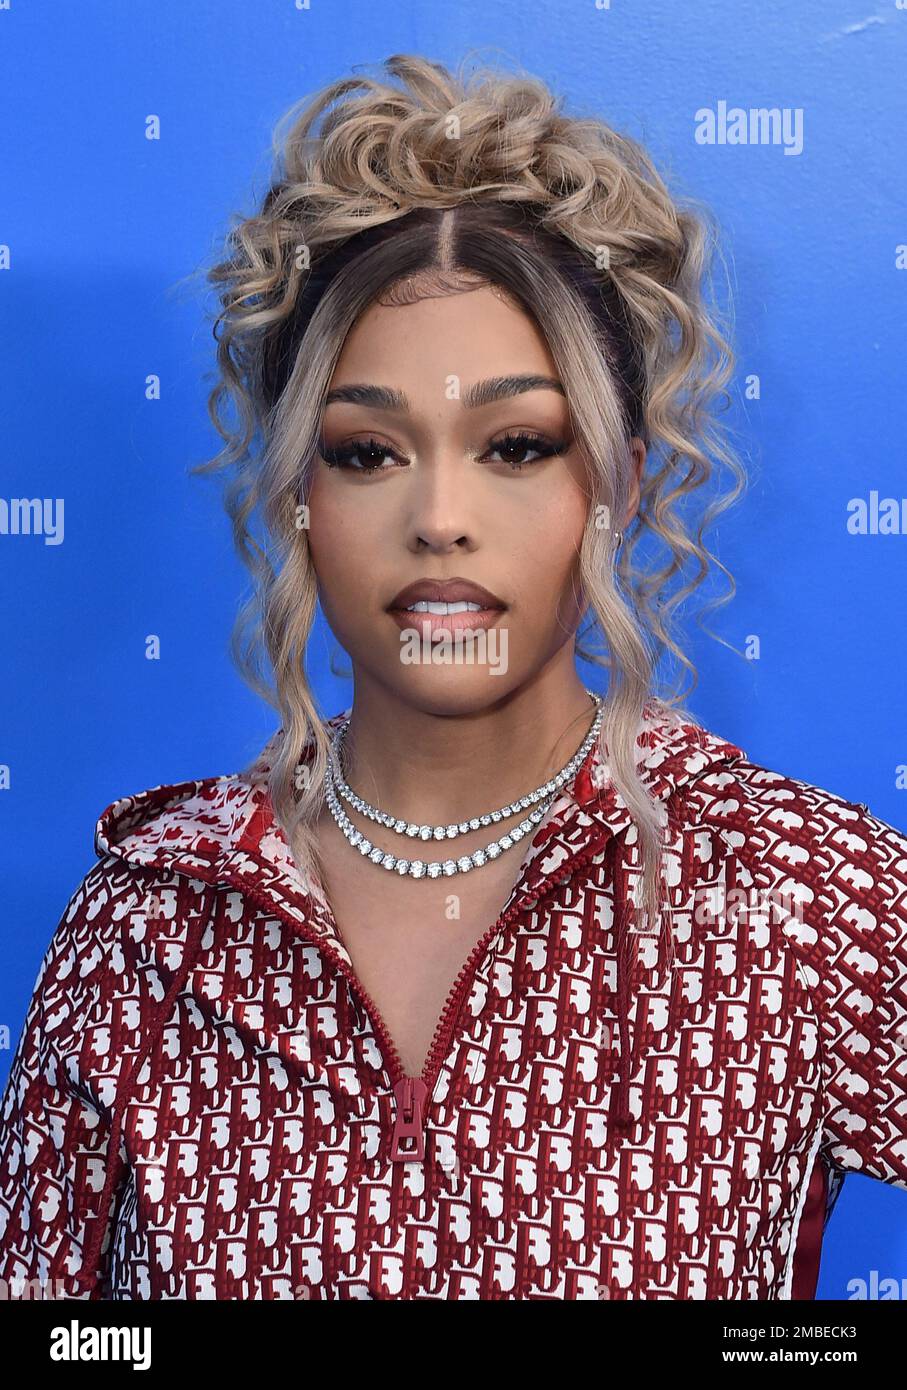 Jordyn Woods at the Dior Men's Spring 2023 Capsule Show, Dior Invites '90s  Pop Stars to a Nostalgic-Themed Show at Venice Beach